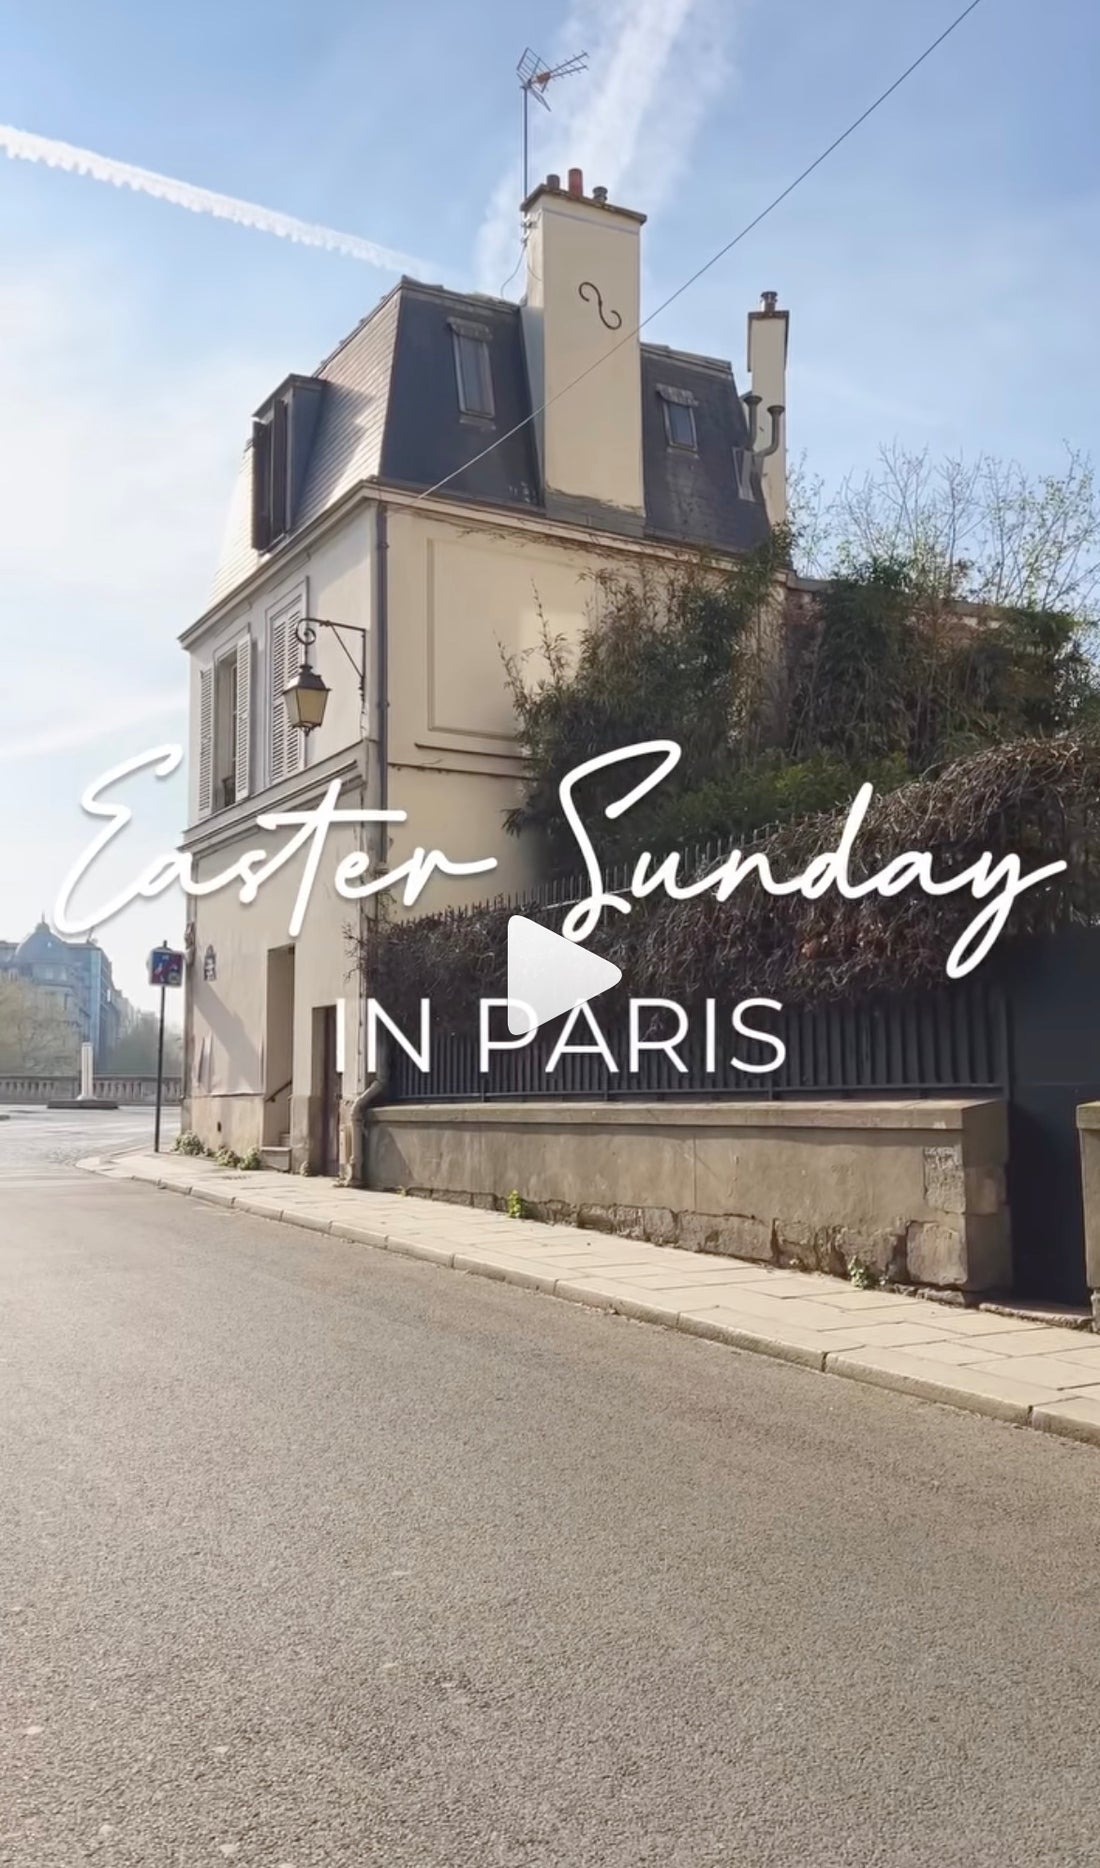 My Easter Sunday in Paris - A few memorable moments to share with you.